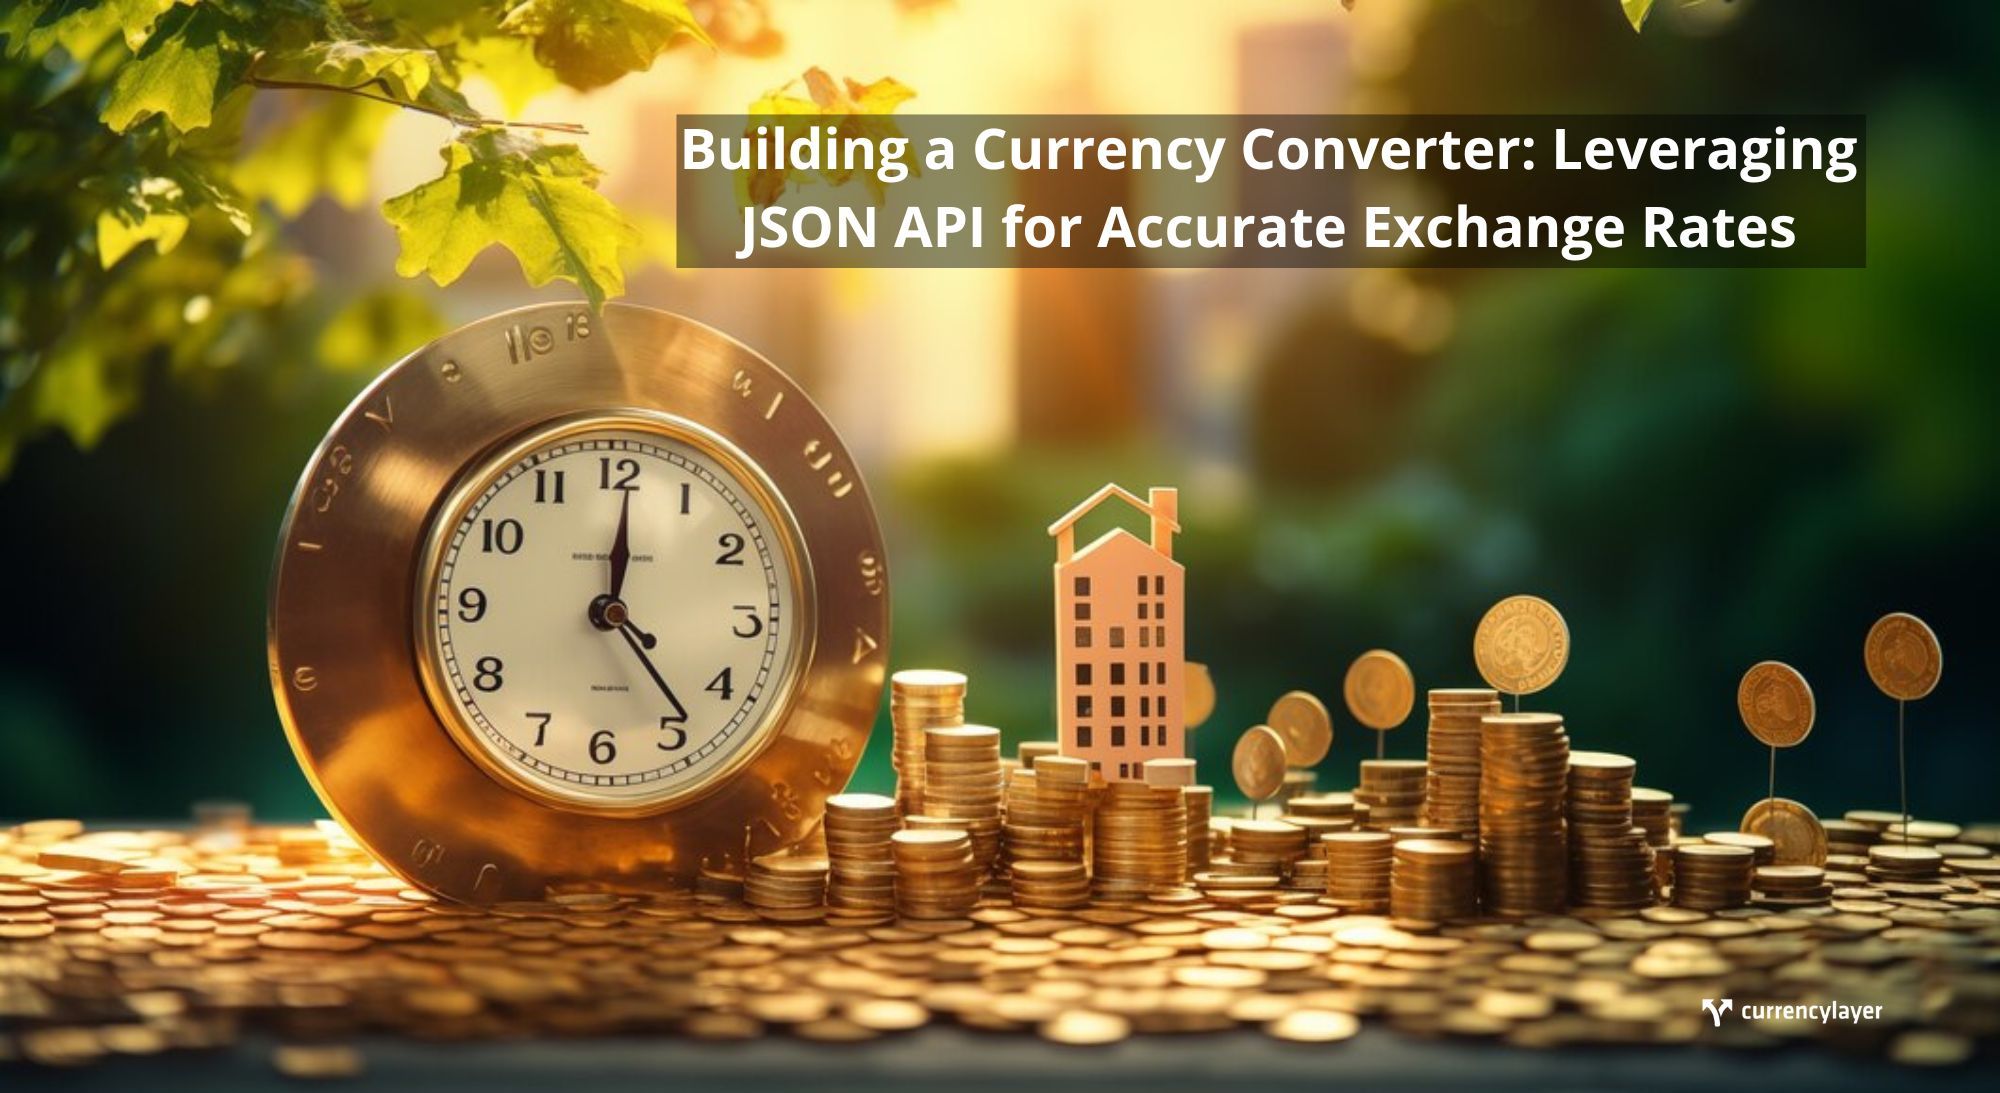 Currency Converter: Using JSON API for Exchange Rates